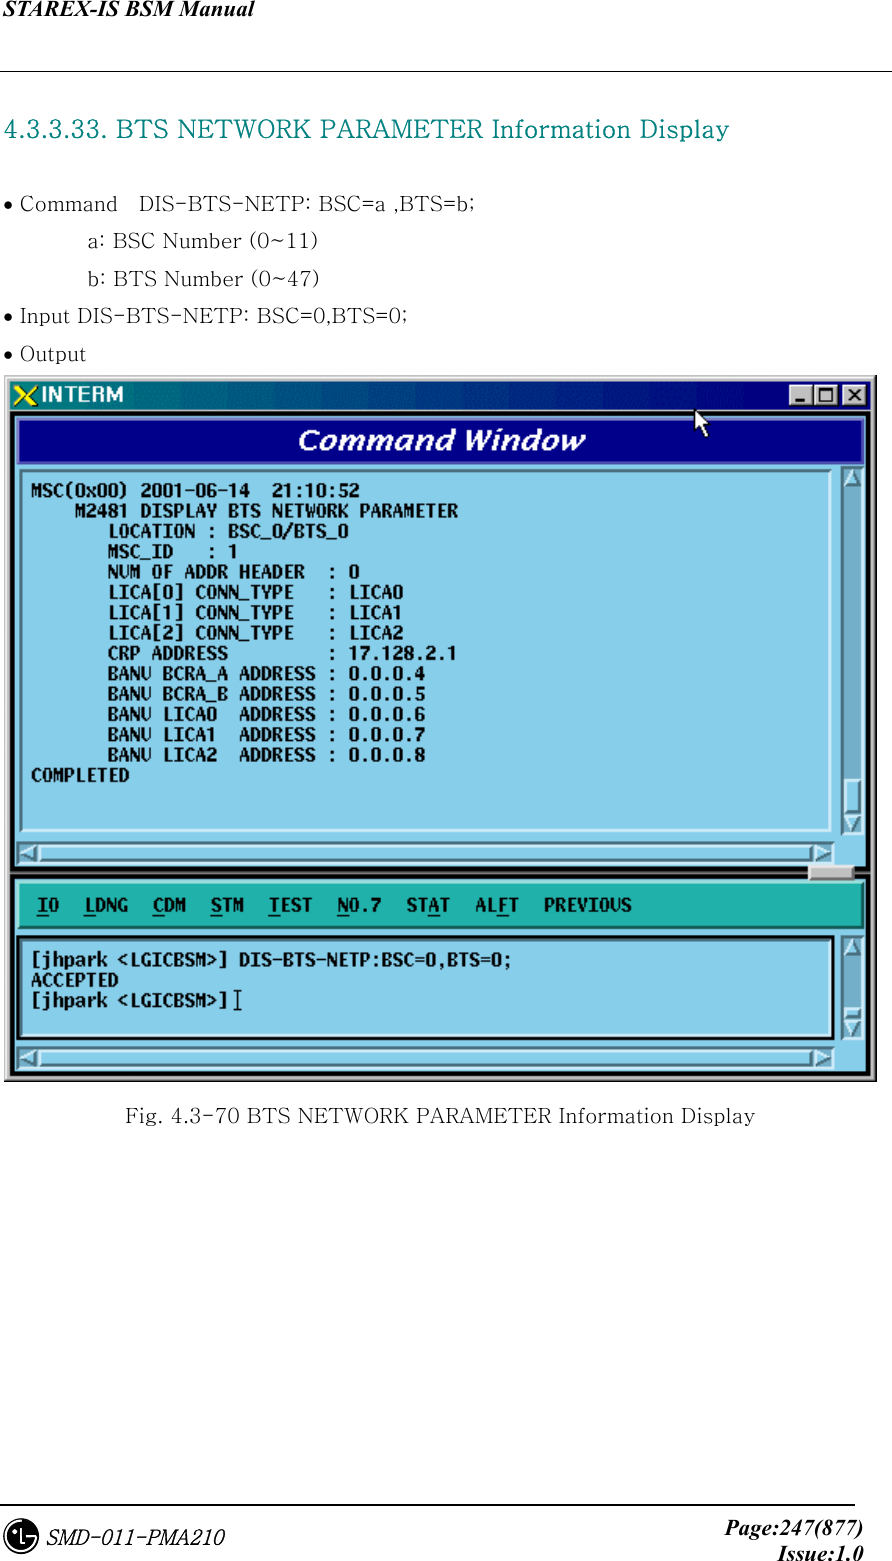 STAREX-IS BSM Manual     Page:247(877)Issue:1.0SMD-011-PMA210  4.3.3.33. BTS NETWORK PARAMETER Information Display  • Command    DIS-BTS-NETP: BSC=a ,BTS=b;         a: BSC Number (0~11)         b: BTS Number (0~47) • Input DIS-BTS-NETP: BSC=0,BTS=0; • Output  Fig. 4.3-70 BTS NETWORK PARAMETER Information Display 